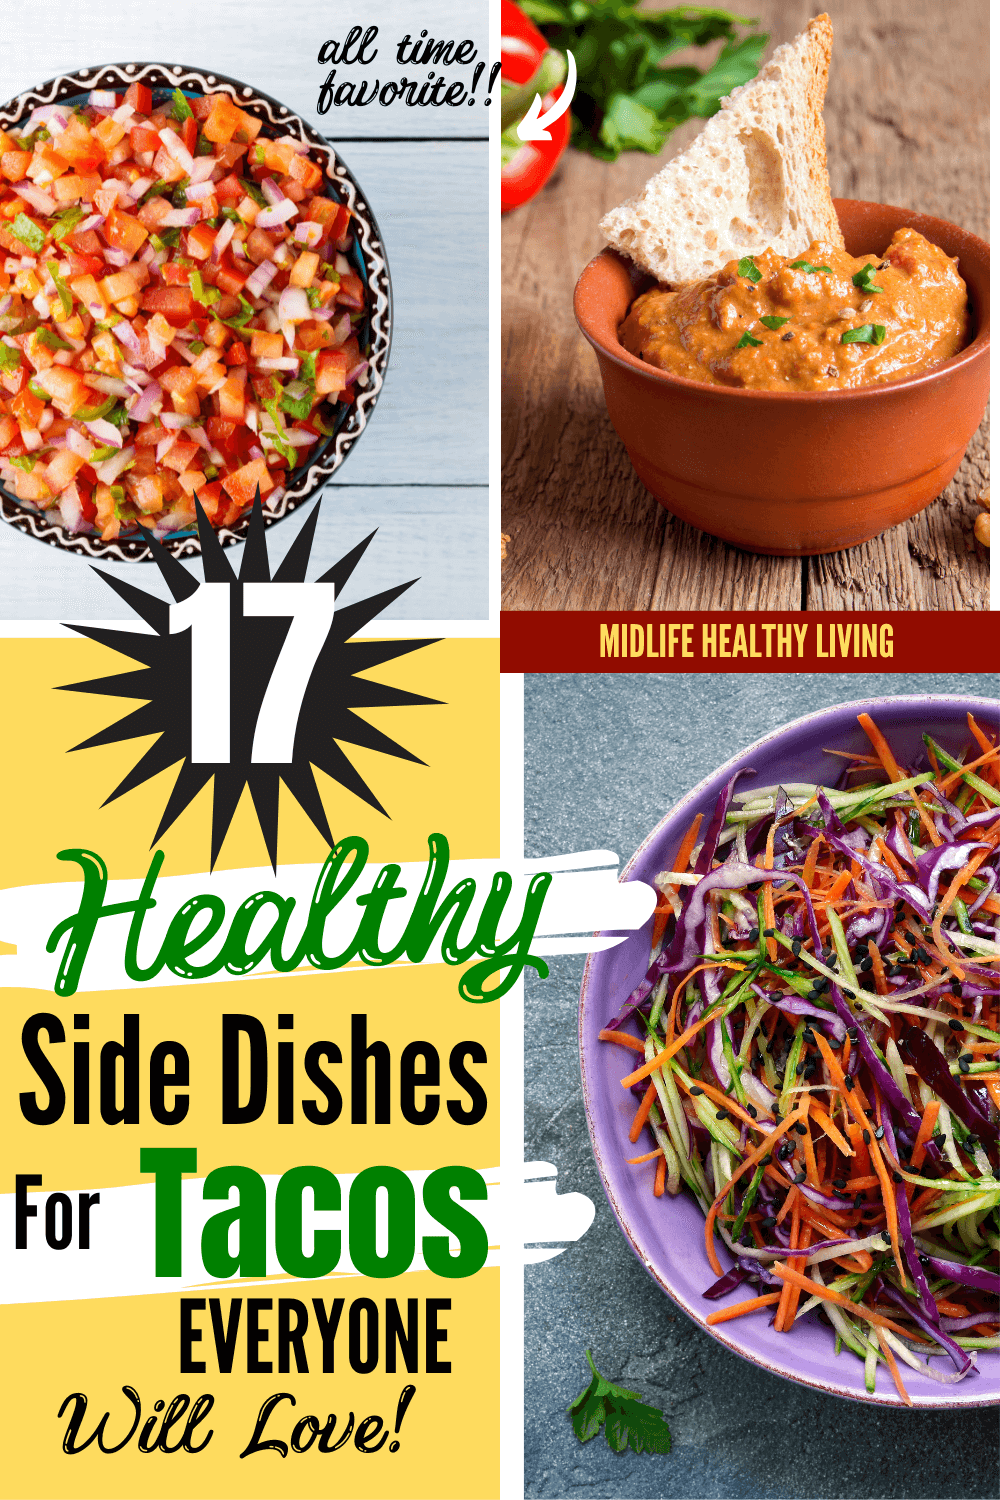 The best side dishes for tacos, including coleslaw, pico de gallo and salsa dip.